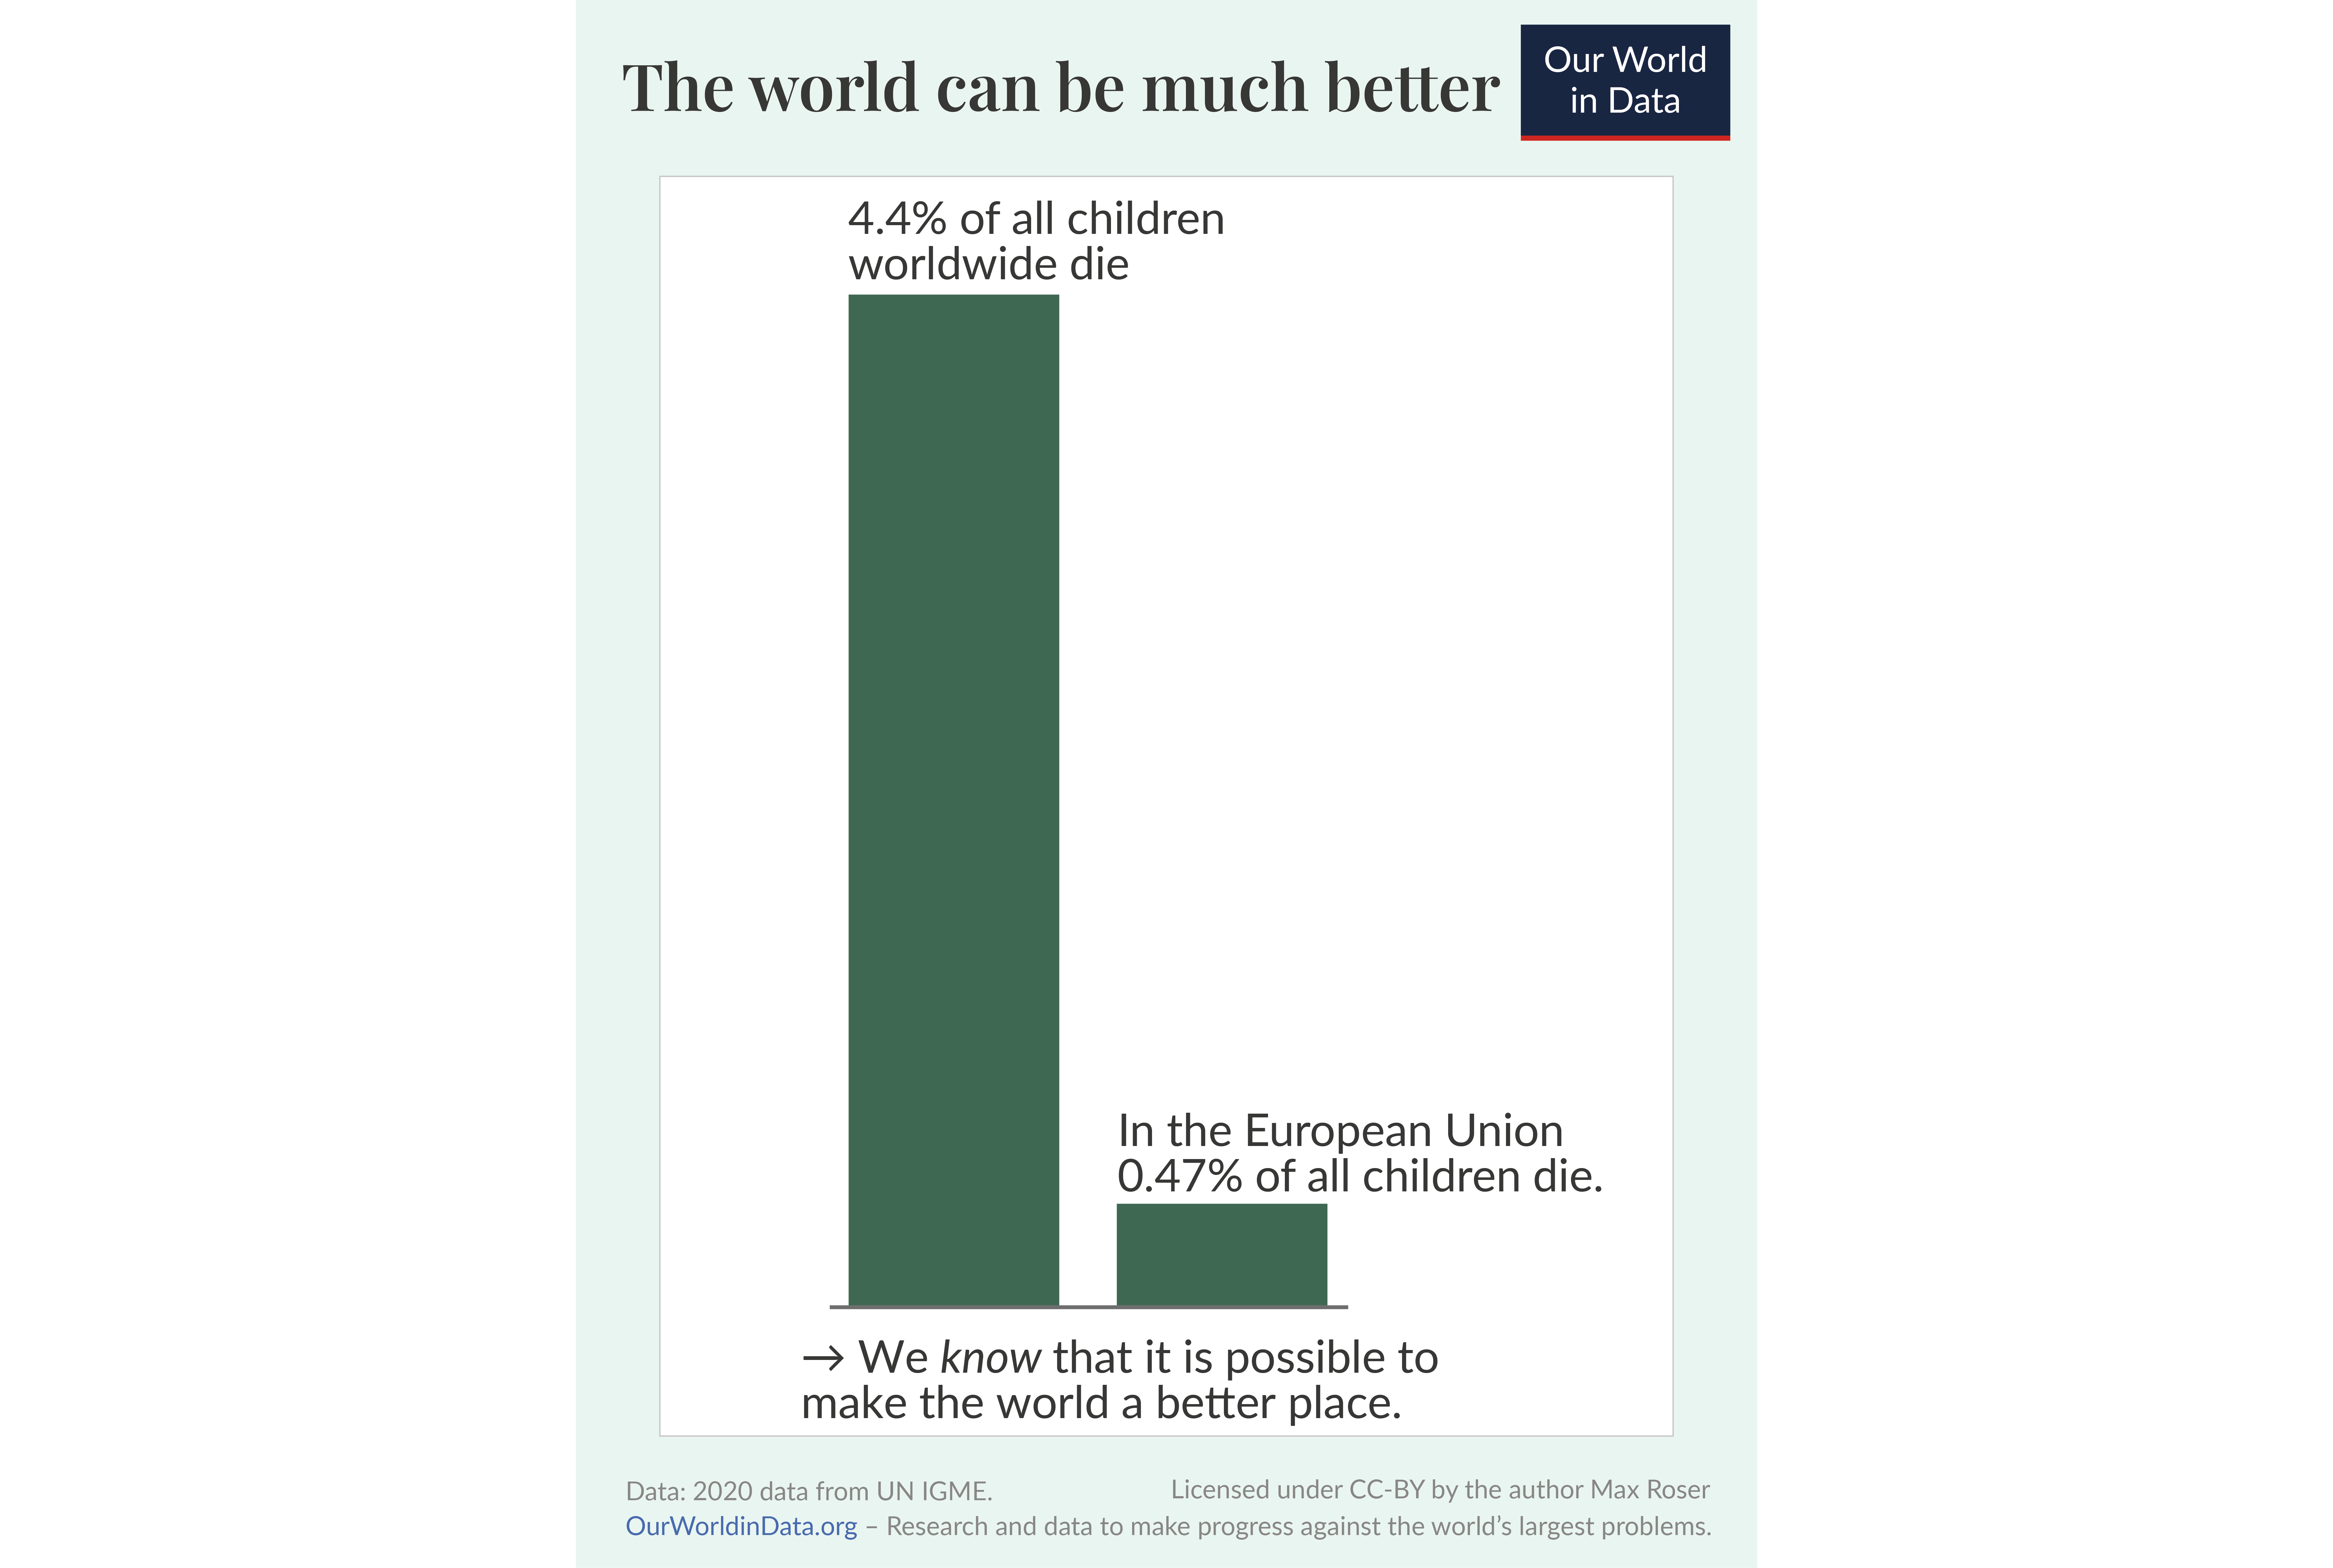 A chart that shows that the global child mortality rate is 4.4% and that the child mortality rate in the European Union is about 10-times lower, at 0.47%.